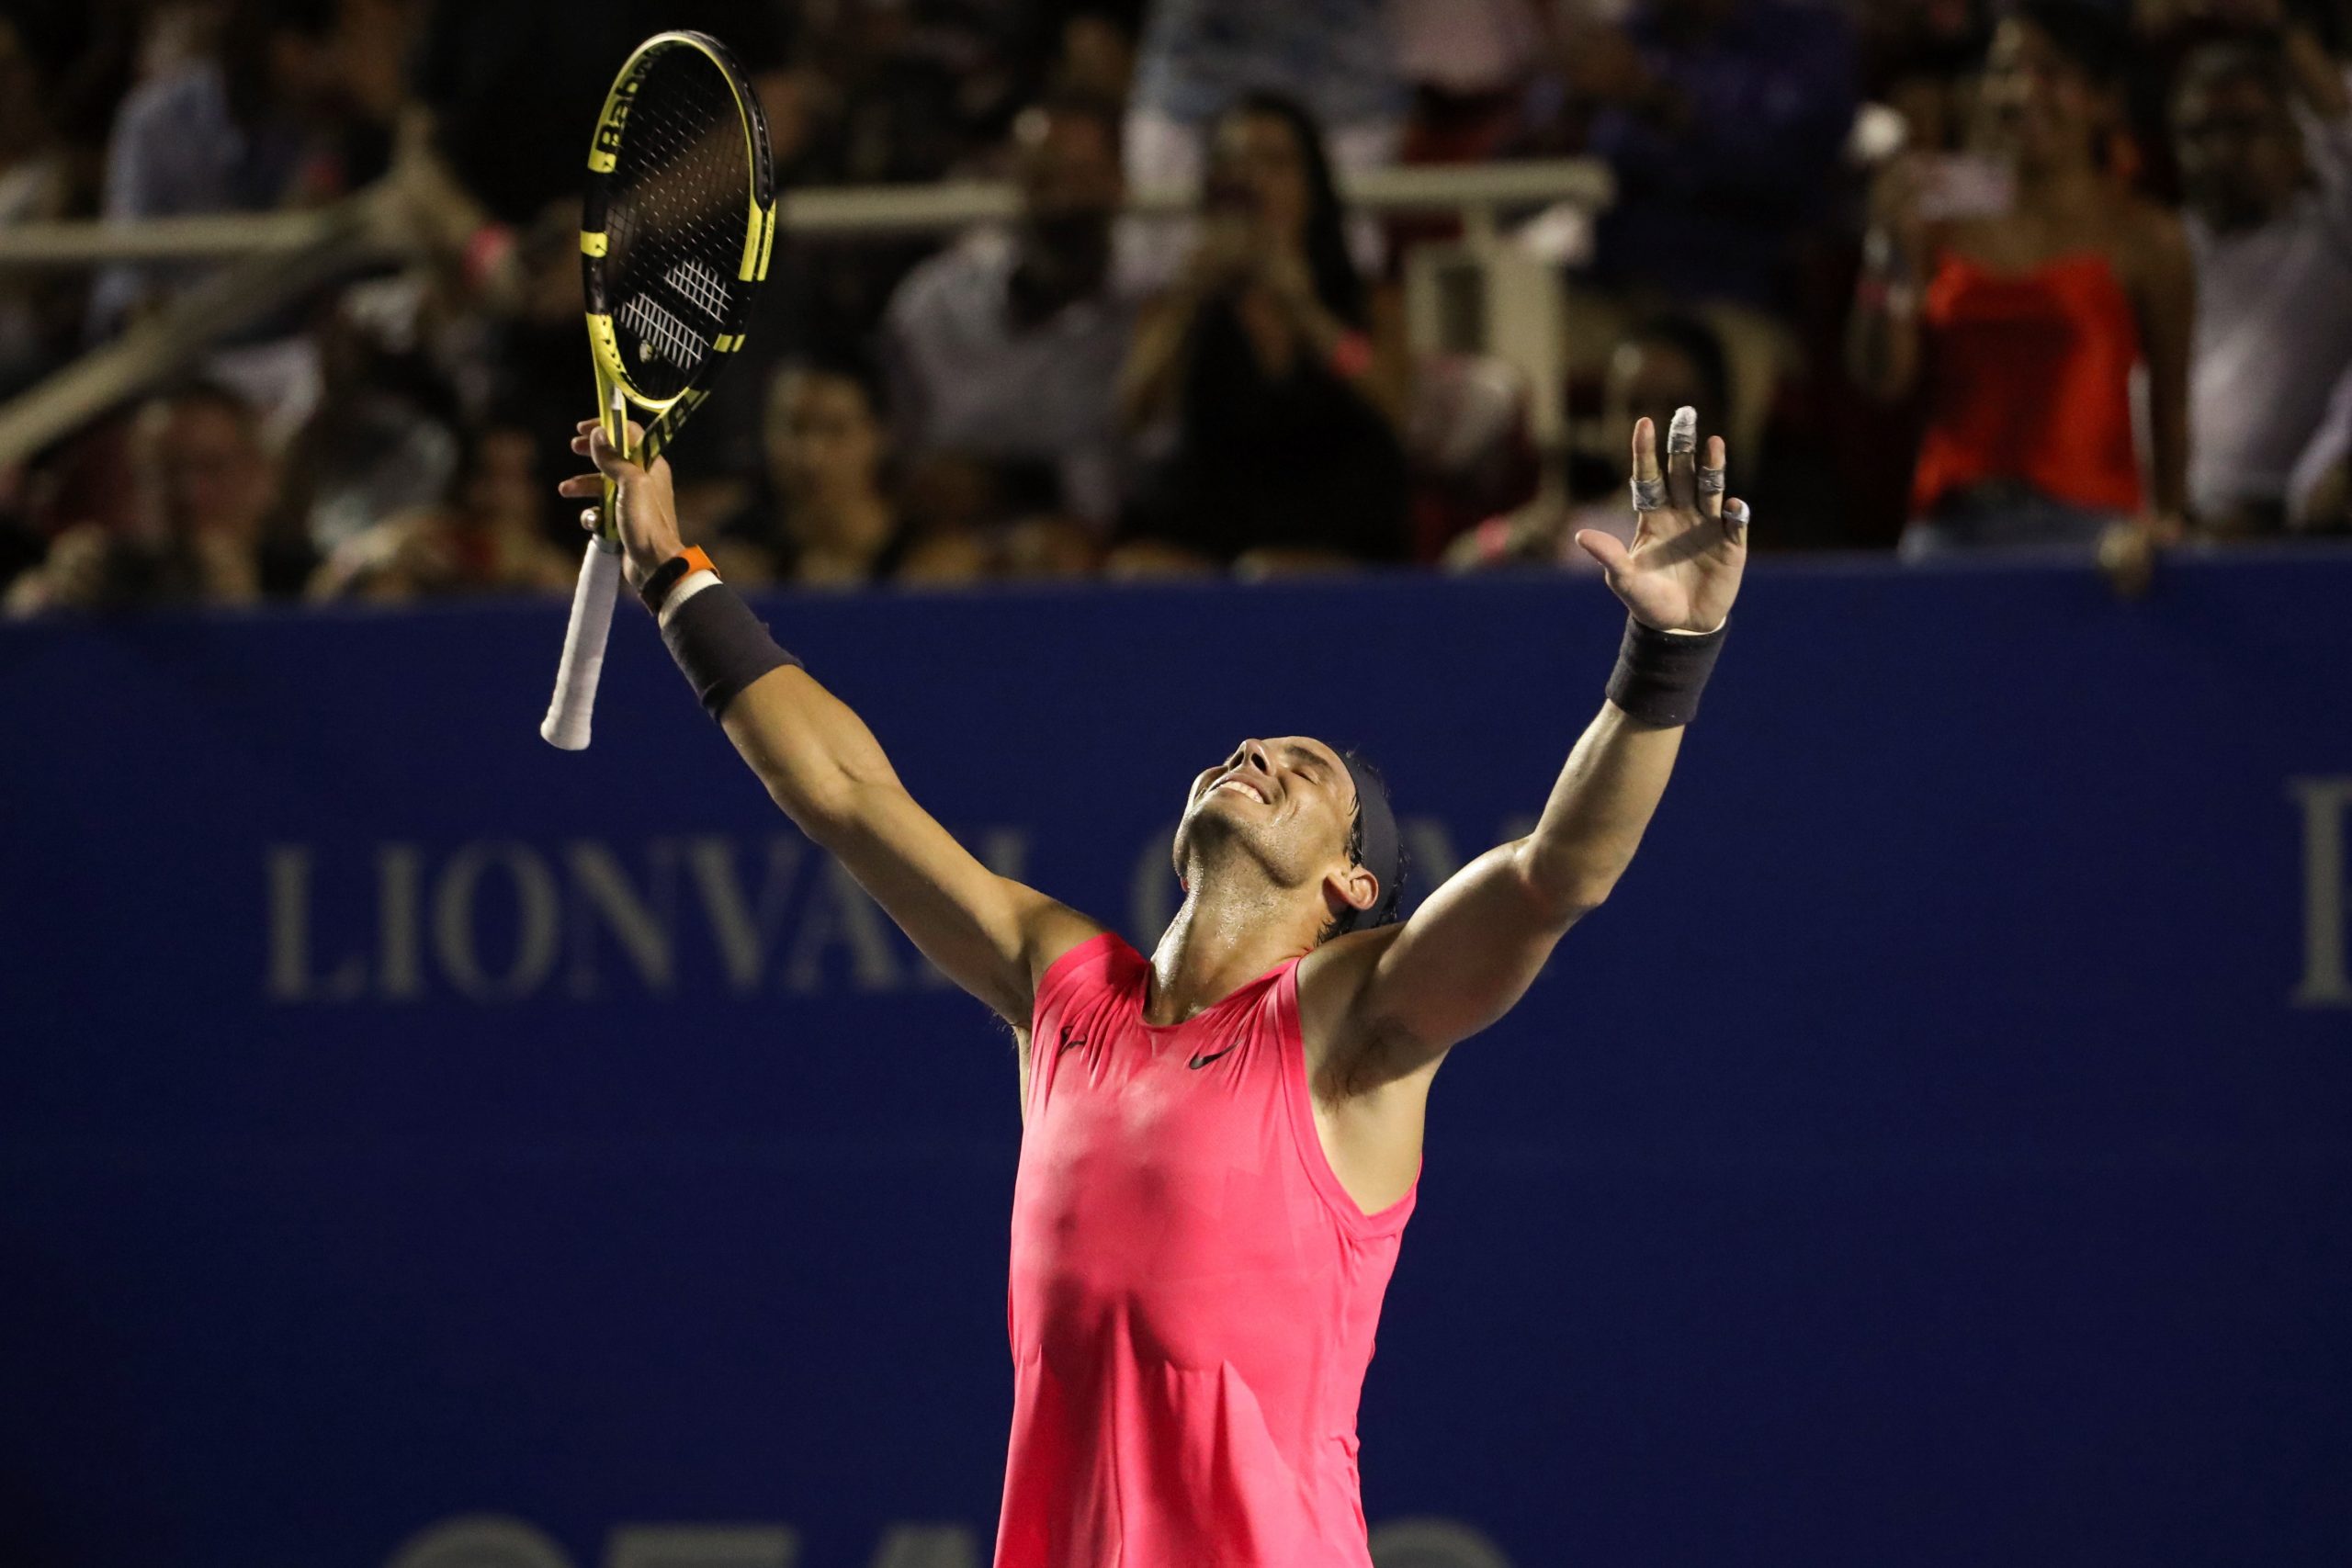 epa08261369 Rafael Nadal of Spain celebrates after defeating Taylor Fritz of the USA in the Men's singles final match of Mexican Open tennis tournament in Acapulco, Mexico, 29 February 2020.  EPA/DAVID GUZMAN